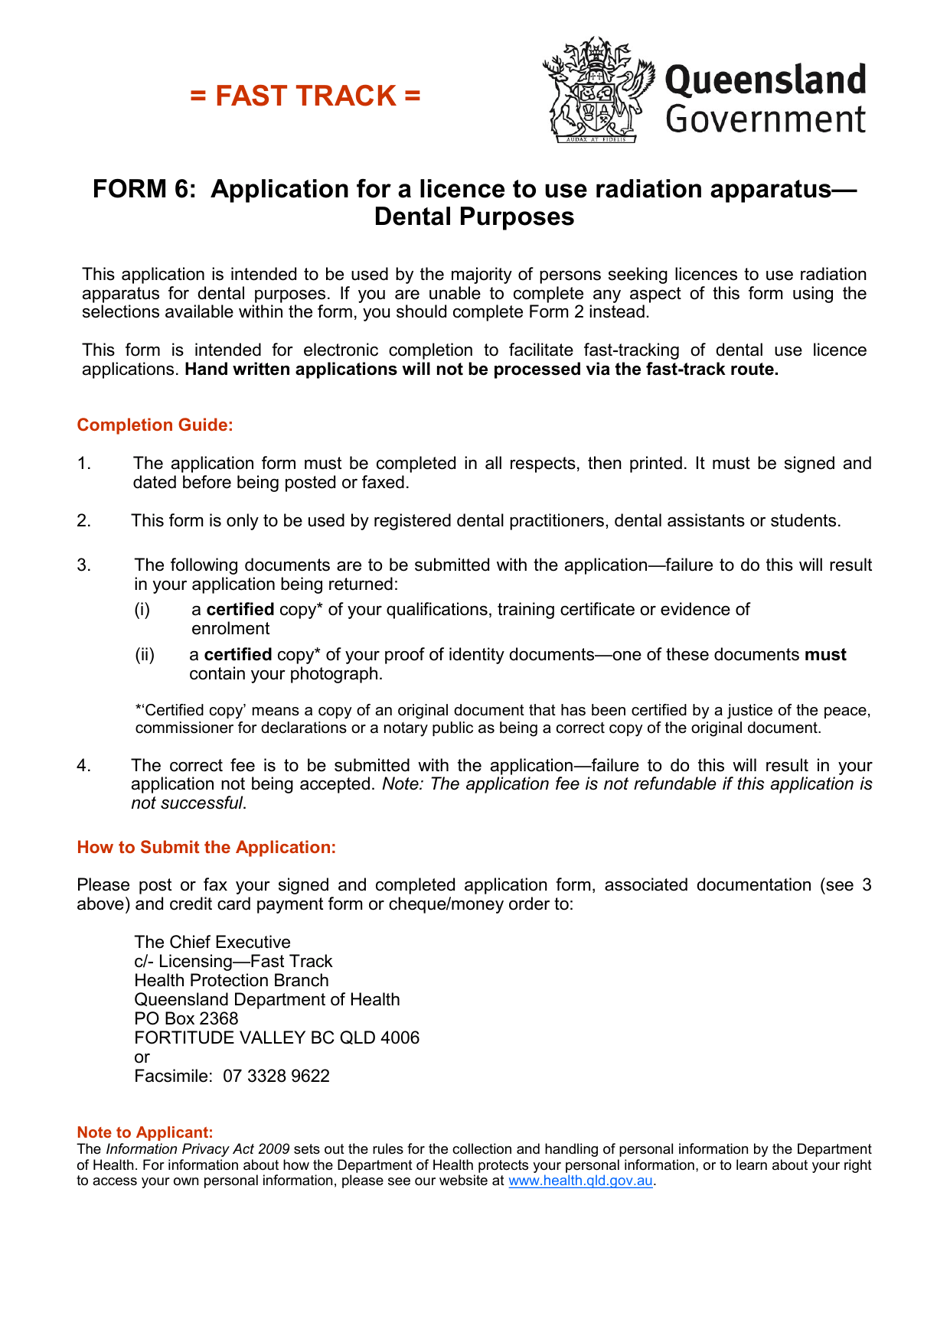 Form 6 Application for a Licence to Use Radiation Apparatus - Dental Purposes - Queensland, Australia, Page 1